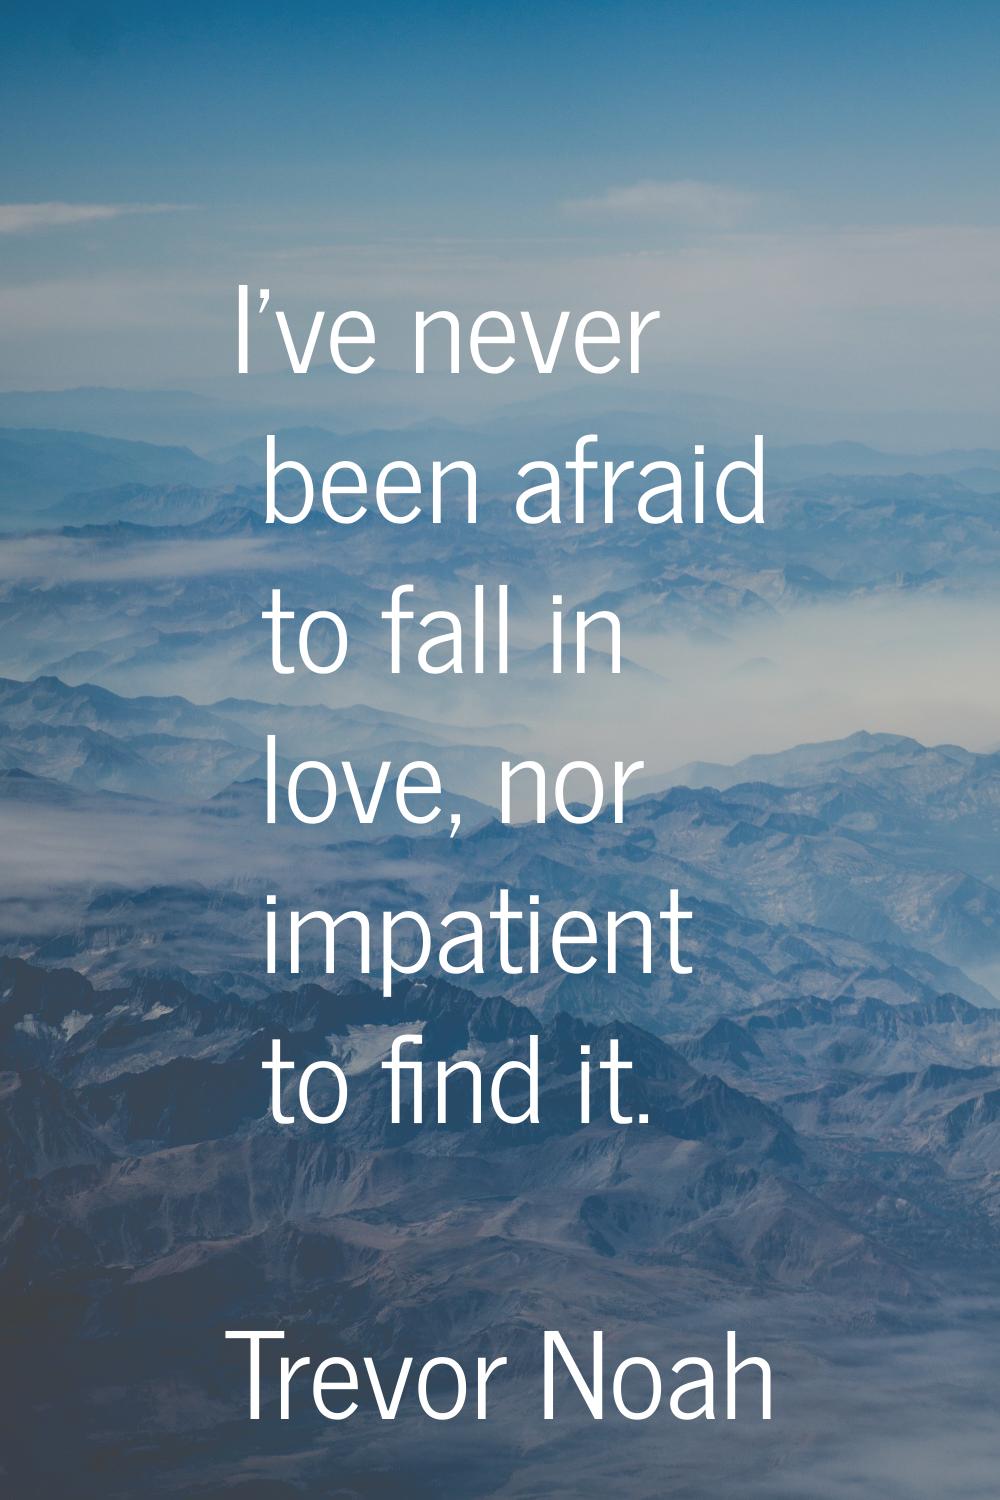 I've never been afraid to fall in love, nor impatient to find it.